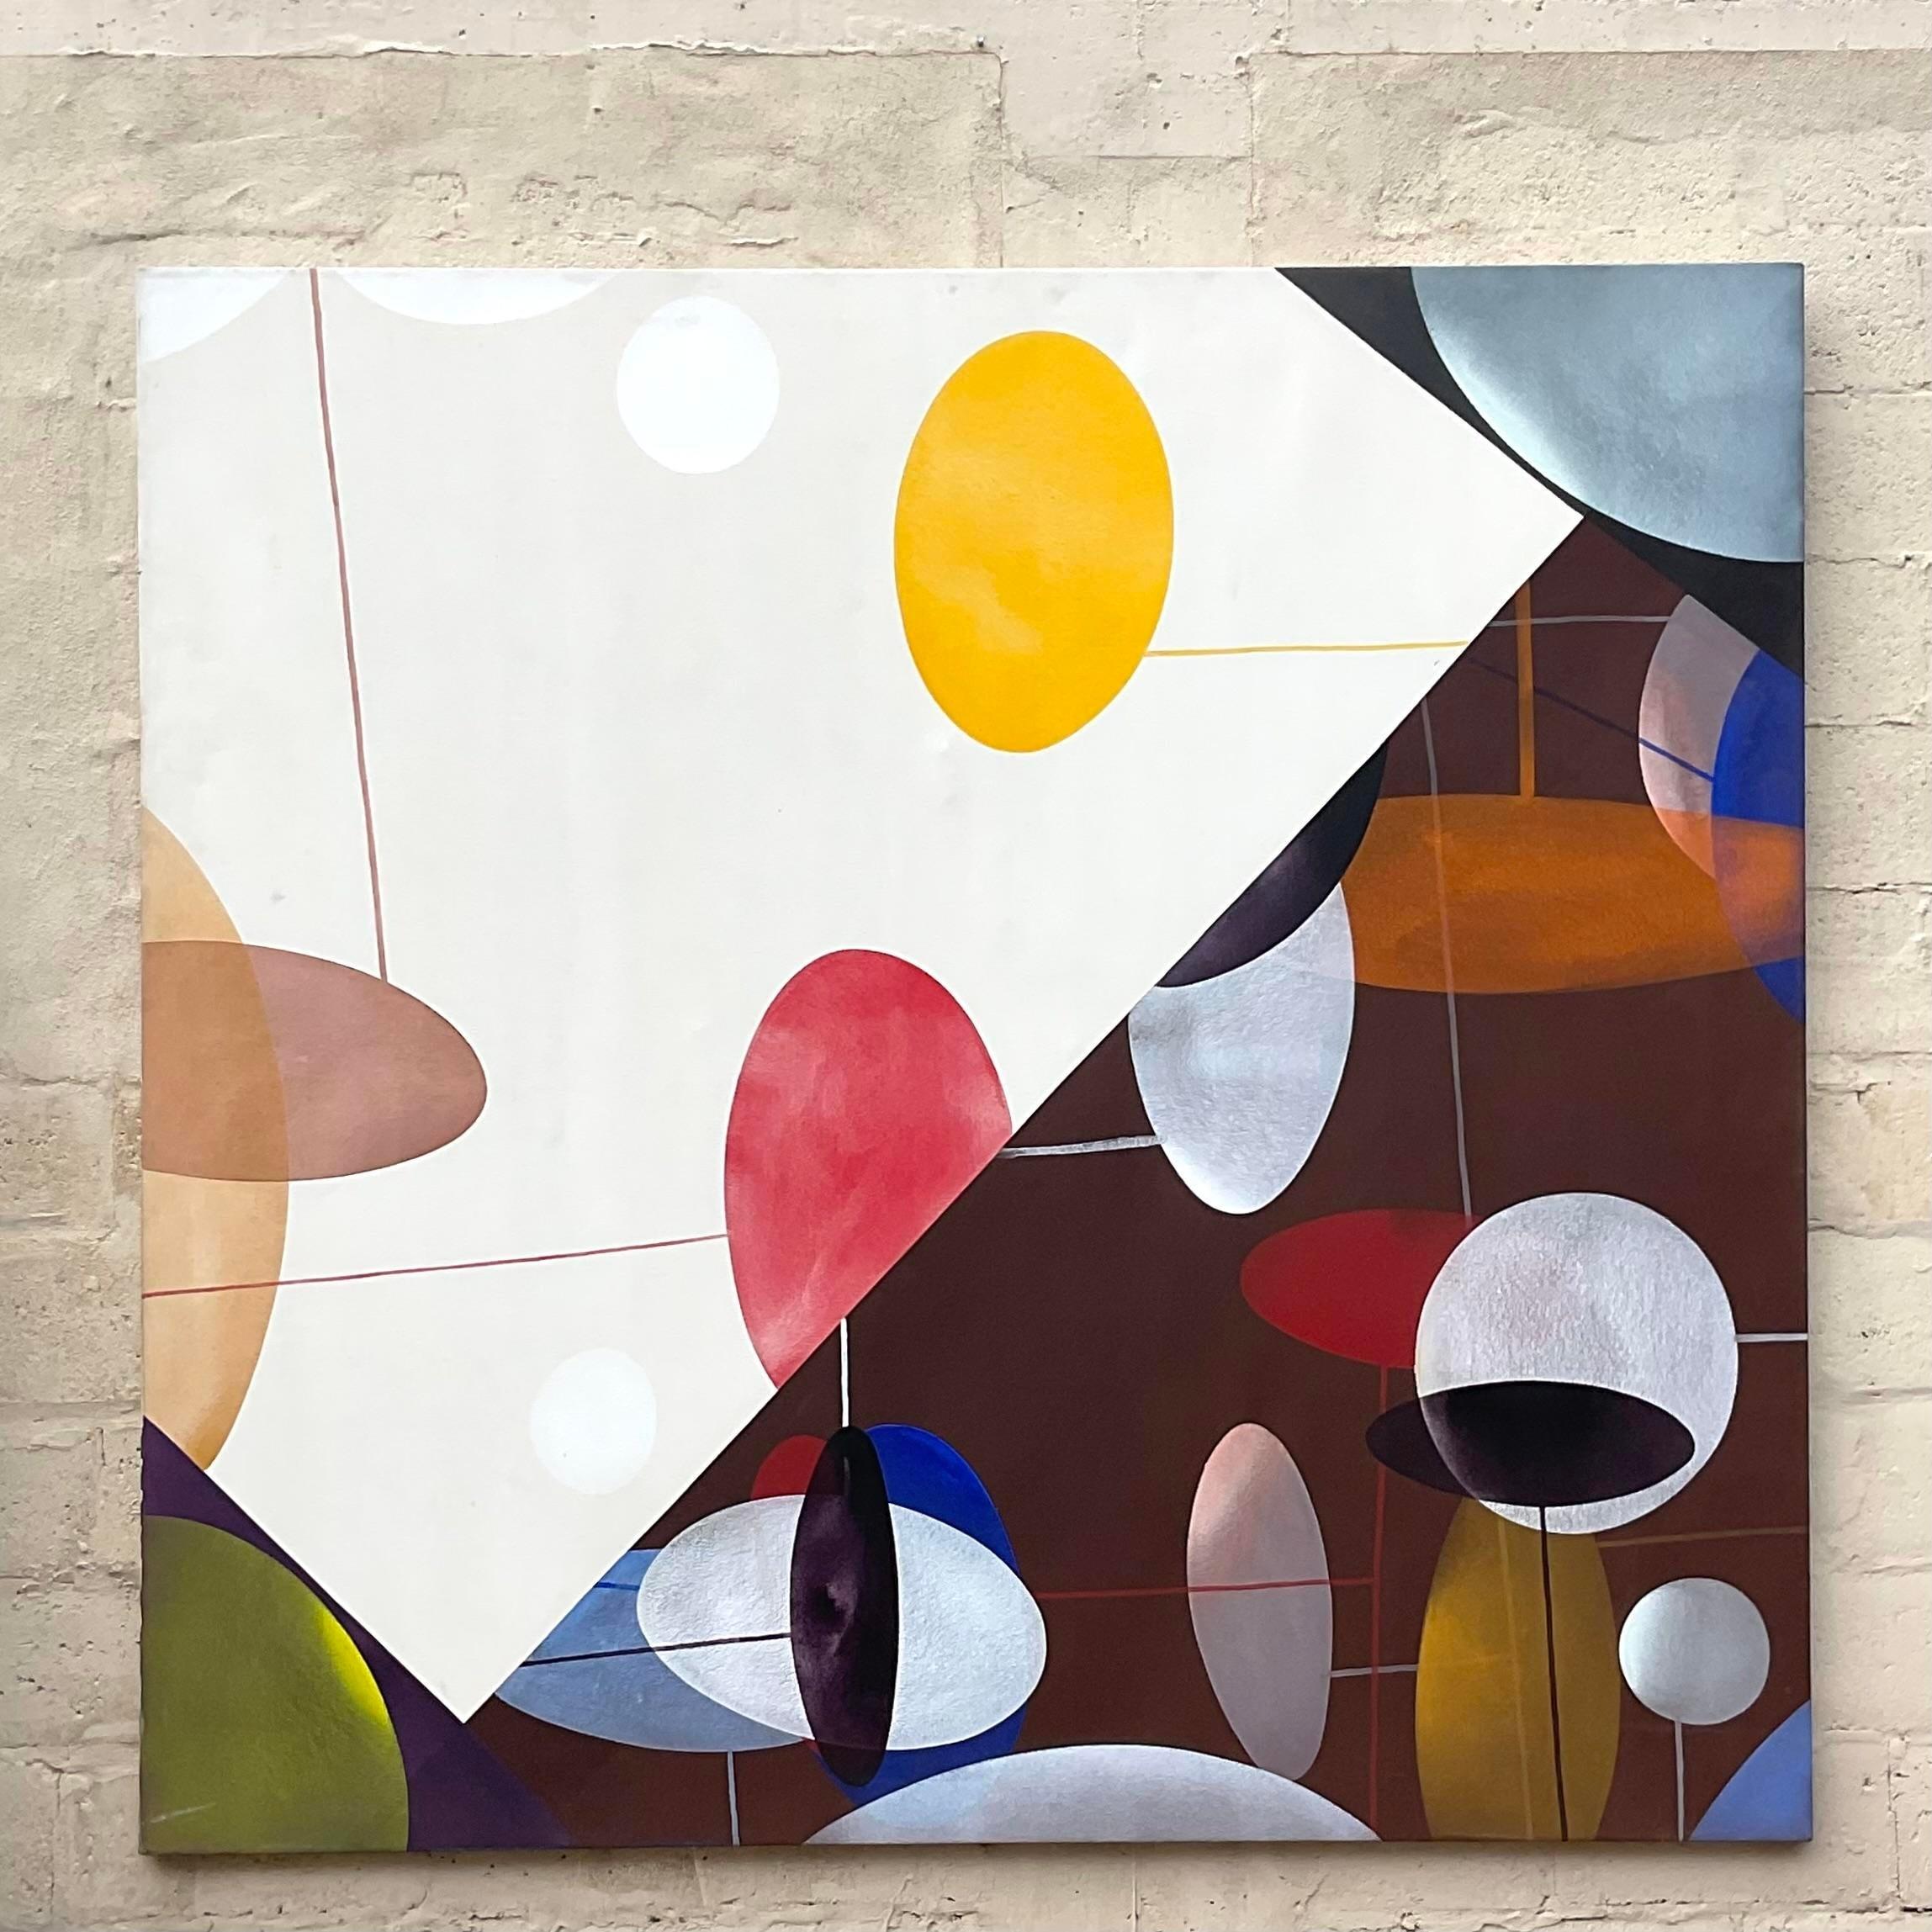 Vintage Boho 1980s Abstract Geometric Original Oil Painting on Canvas In Good Condition For Sale In west palm beach, FL